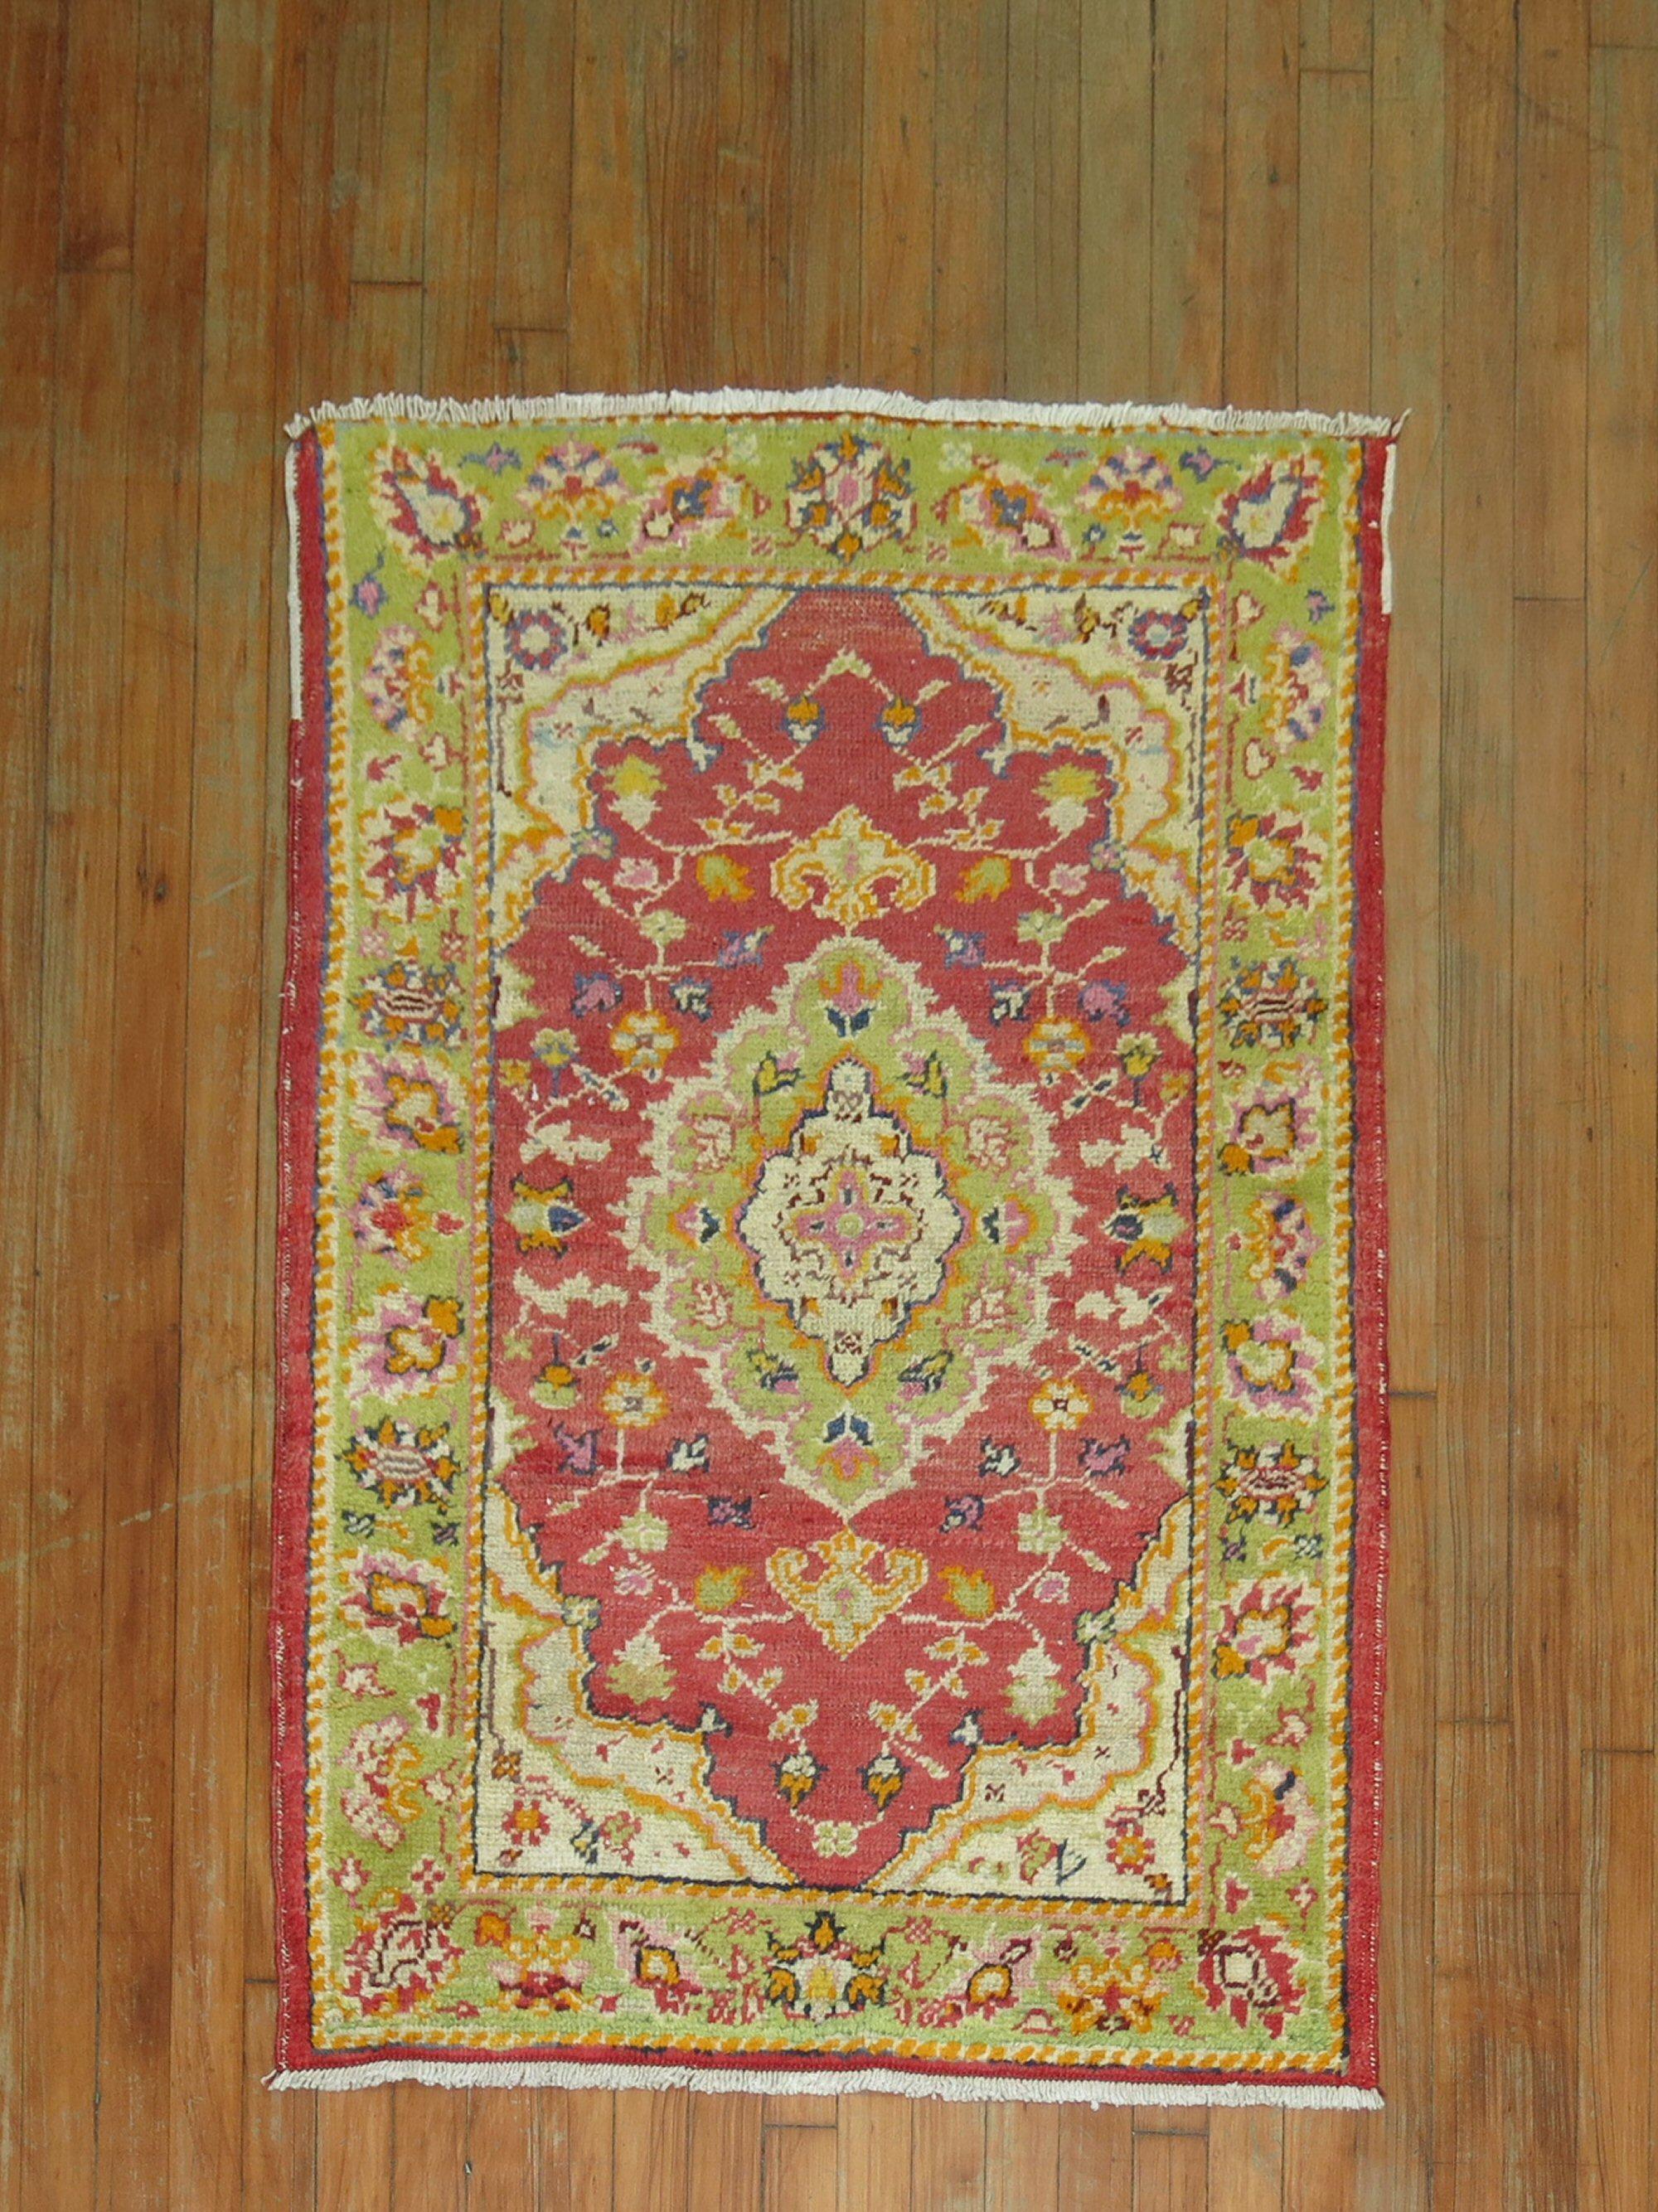 A mid 20th century Turkish rug with a colorful red and green palette

Measures: 2'10'' x 4'1''.